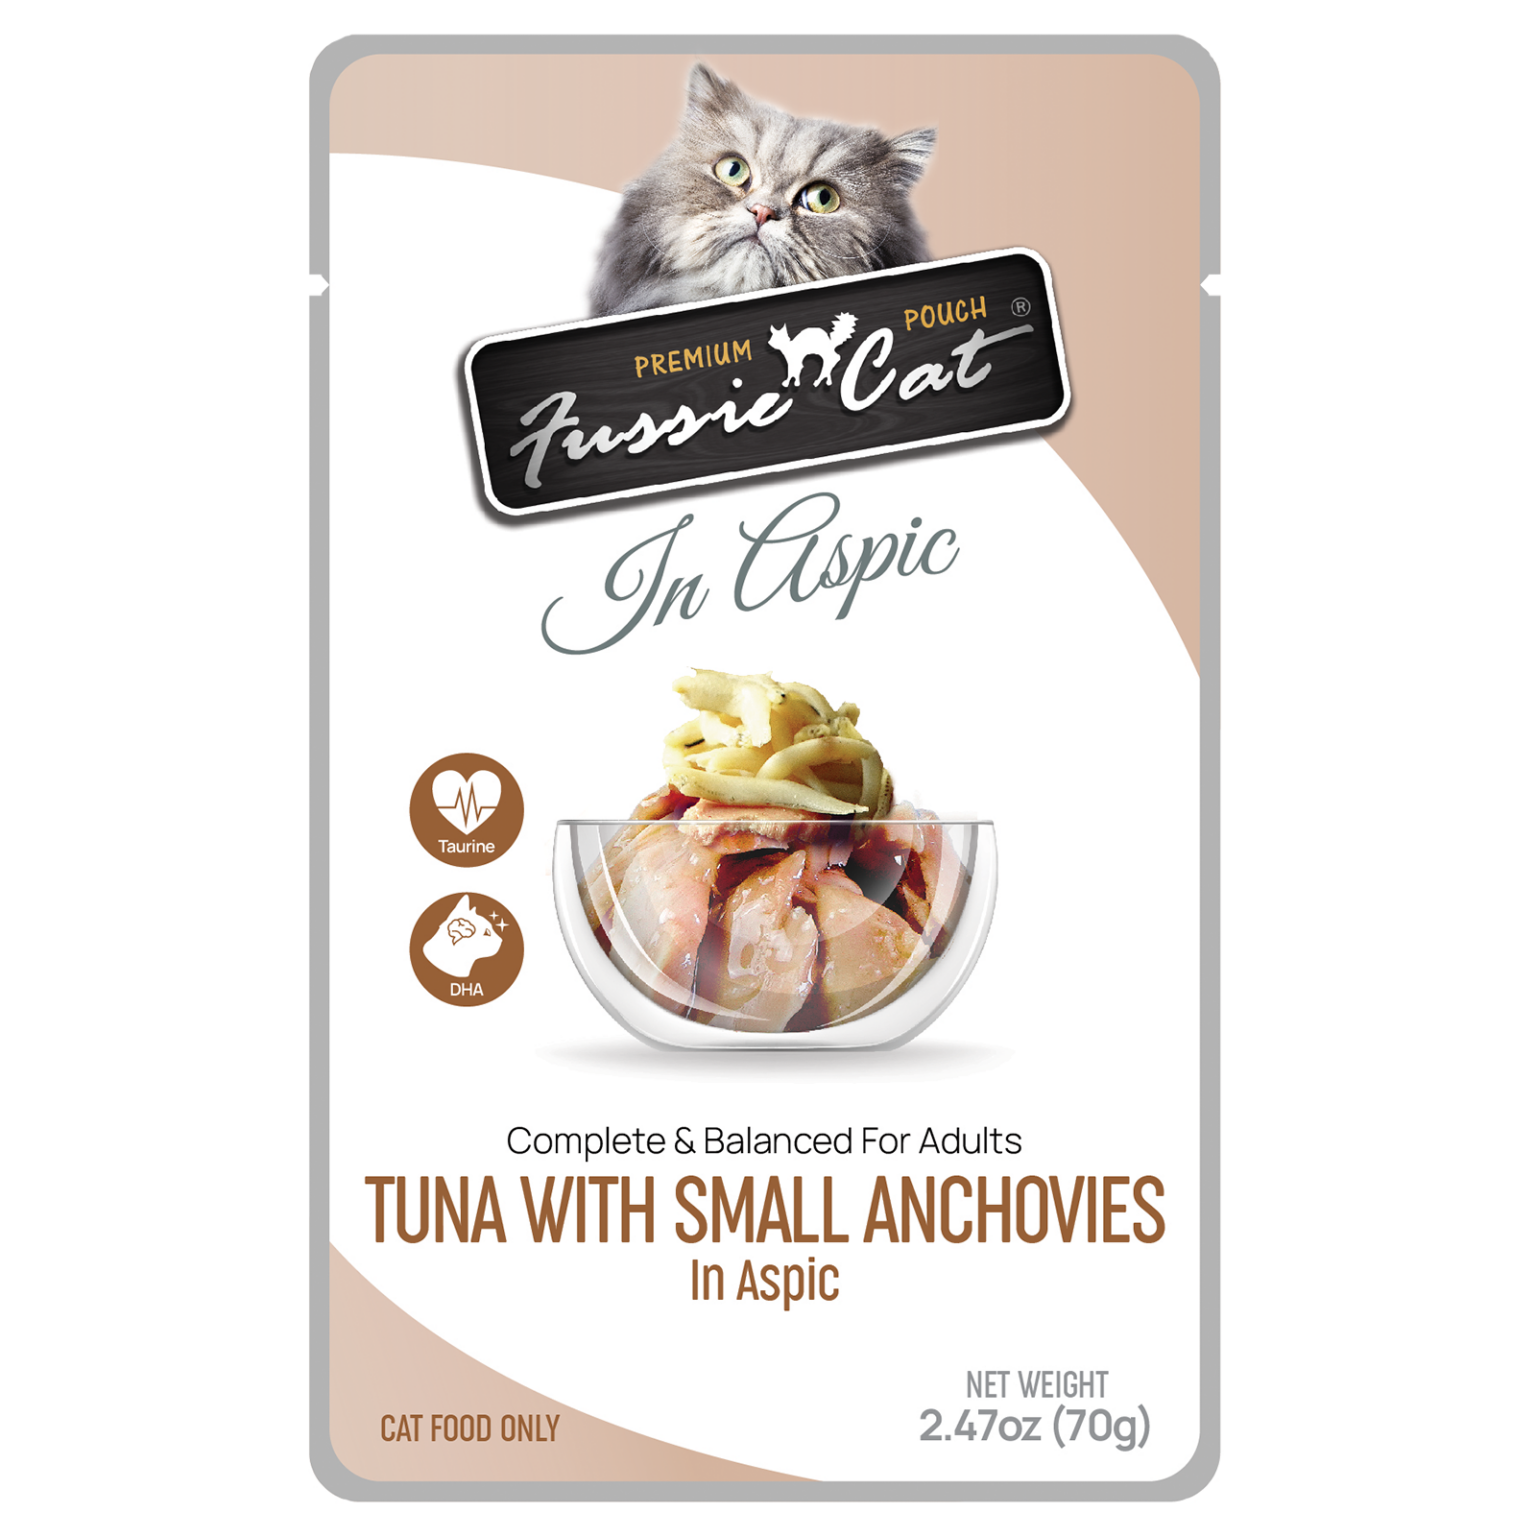 Tuna with Small Anchovies in Aspic Pouch